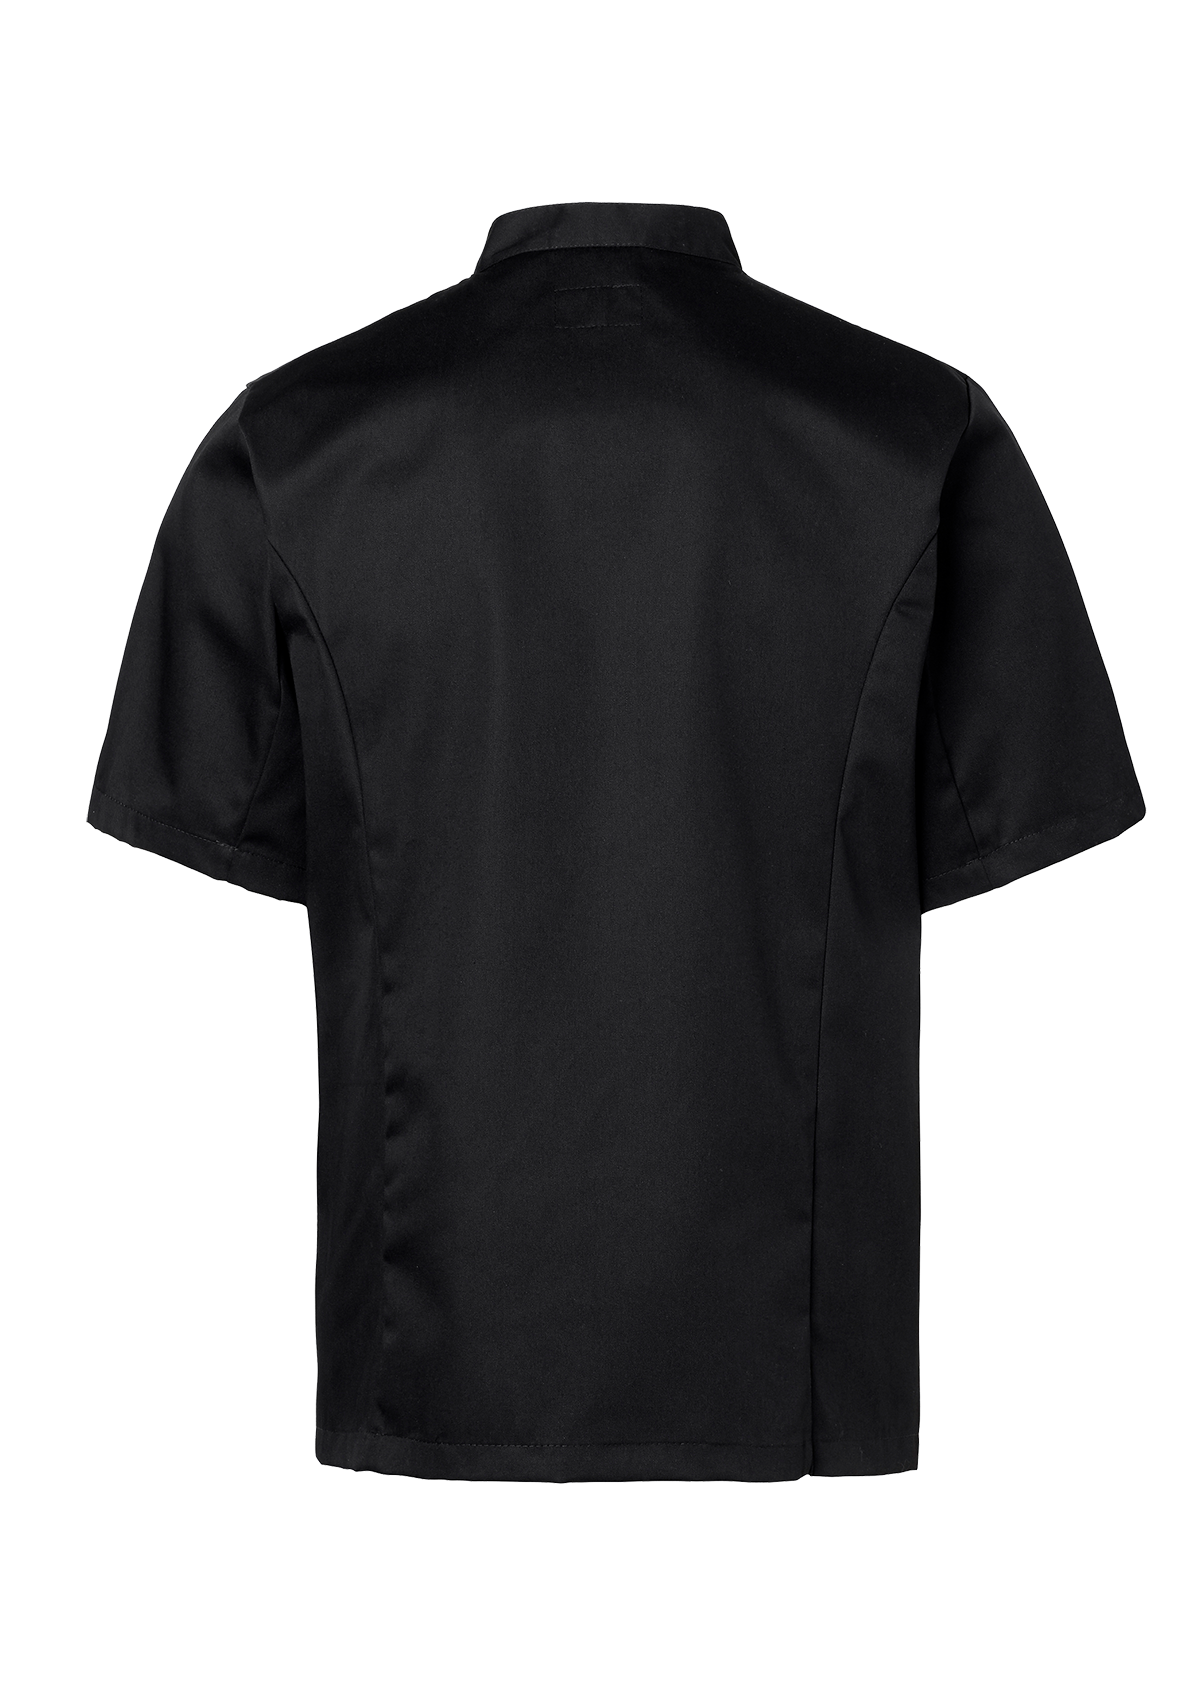 Men's chef jacket in classic straight cut with short sleeves. Segers | Cookniche